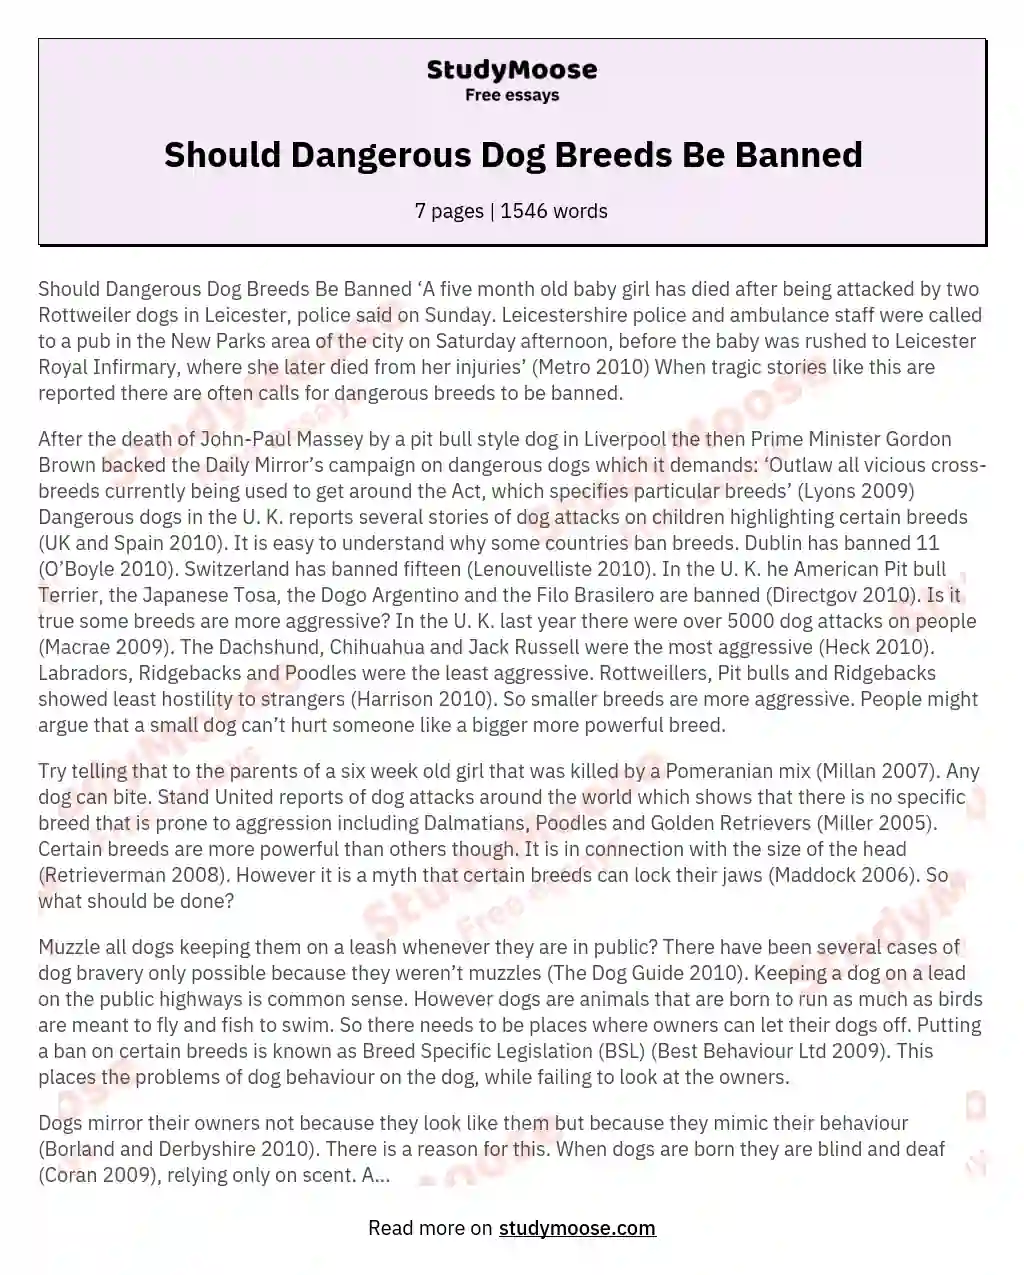 Реферат: Shouls Certain Dog Breeds Be Banned From